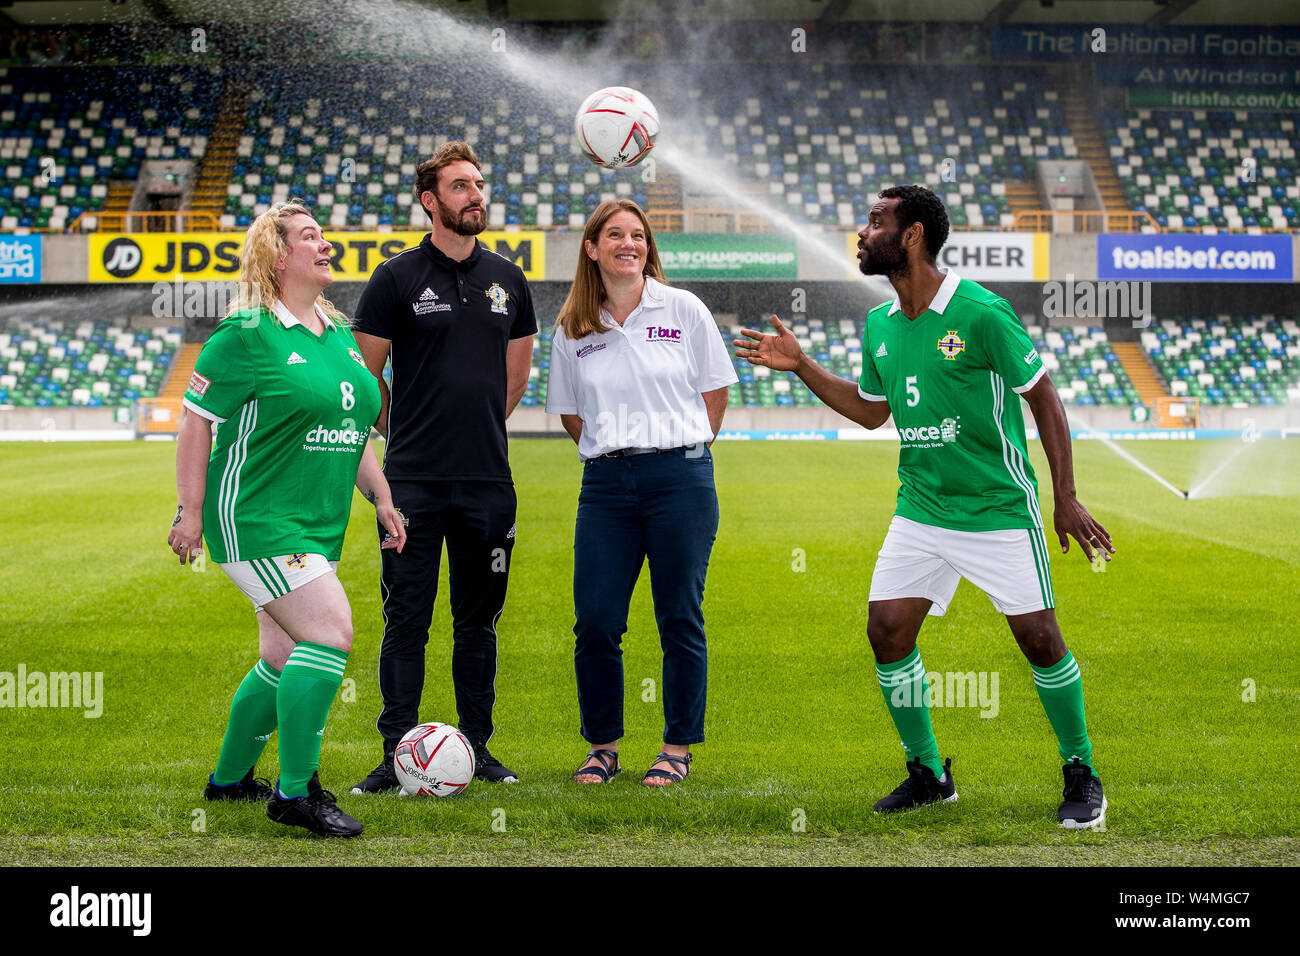 Ahemd Elneel (right), captain of the Northern Ireland homeless football team, and who is originally from Sudan heads the ball to Northern Ireland's homeless woman's player, Janette Kelly (left), as Justin McMinn (second from left) of Street Soccer NI, and Katherine Hill (second from right), Director of Active Communities at the Department for Communities watch on, during a photocall at The National Stadium, Windsor Park, ahead of the teams departure tomorrow for the Homeless World Cup in Cardiff this coming weekend. Stock Photo